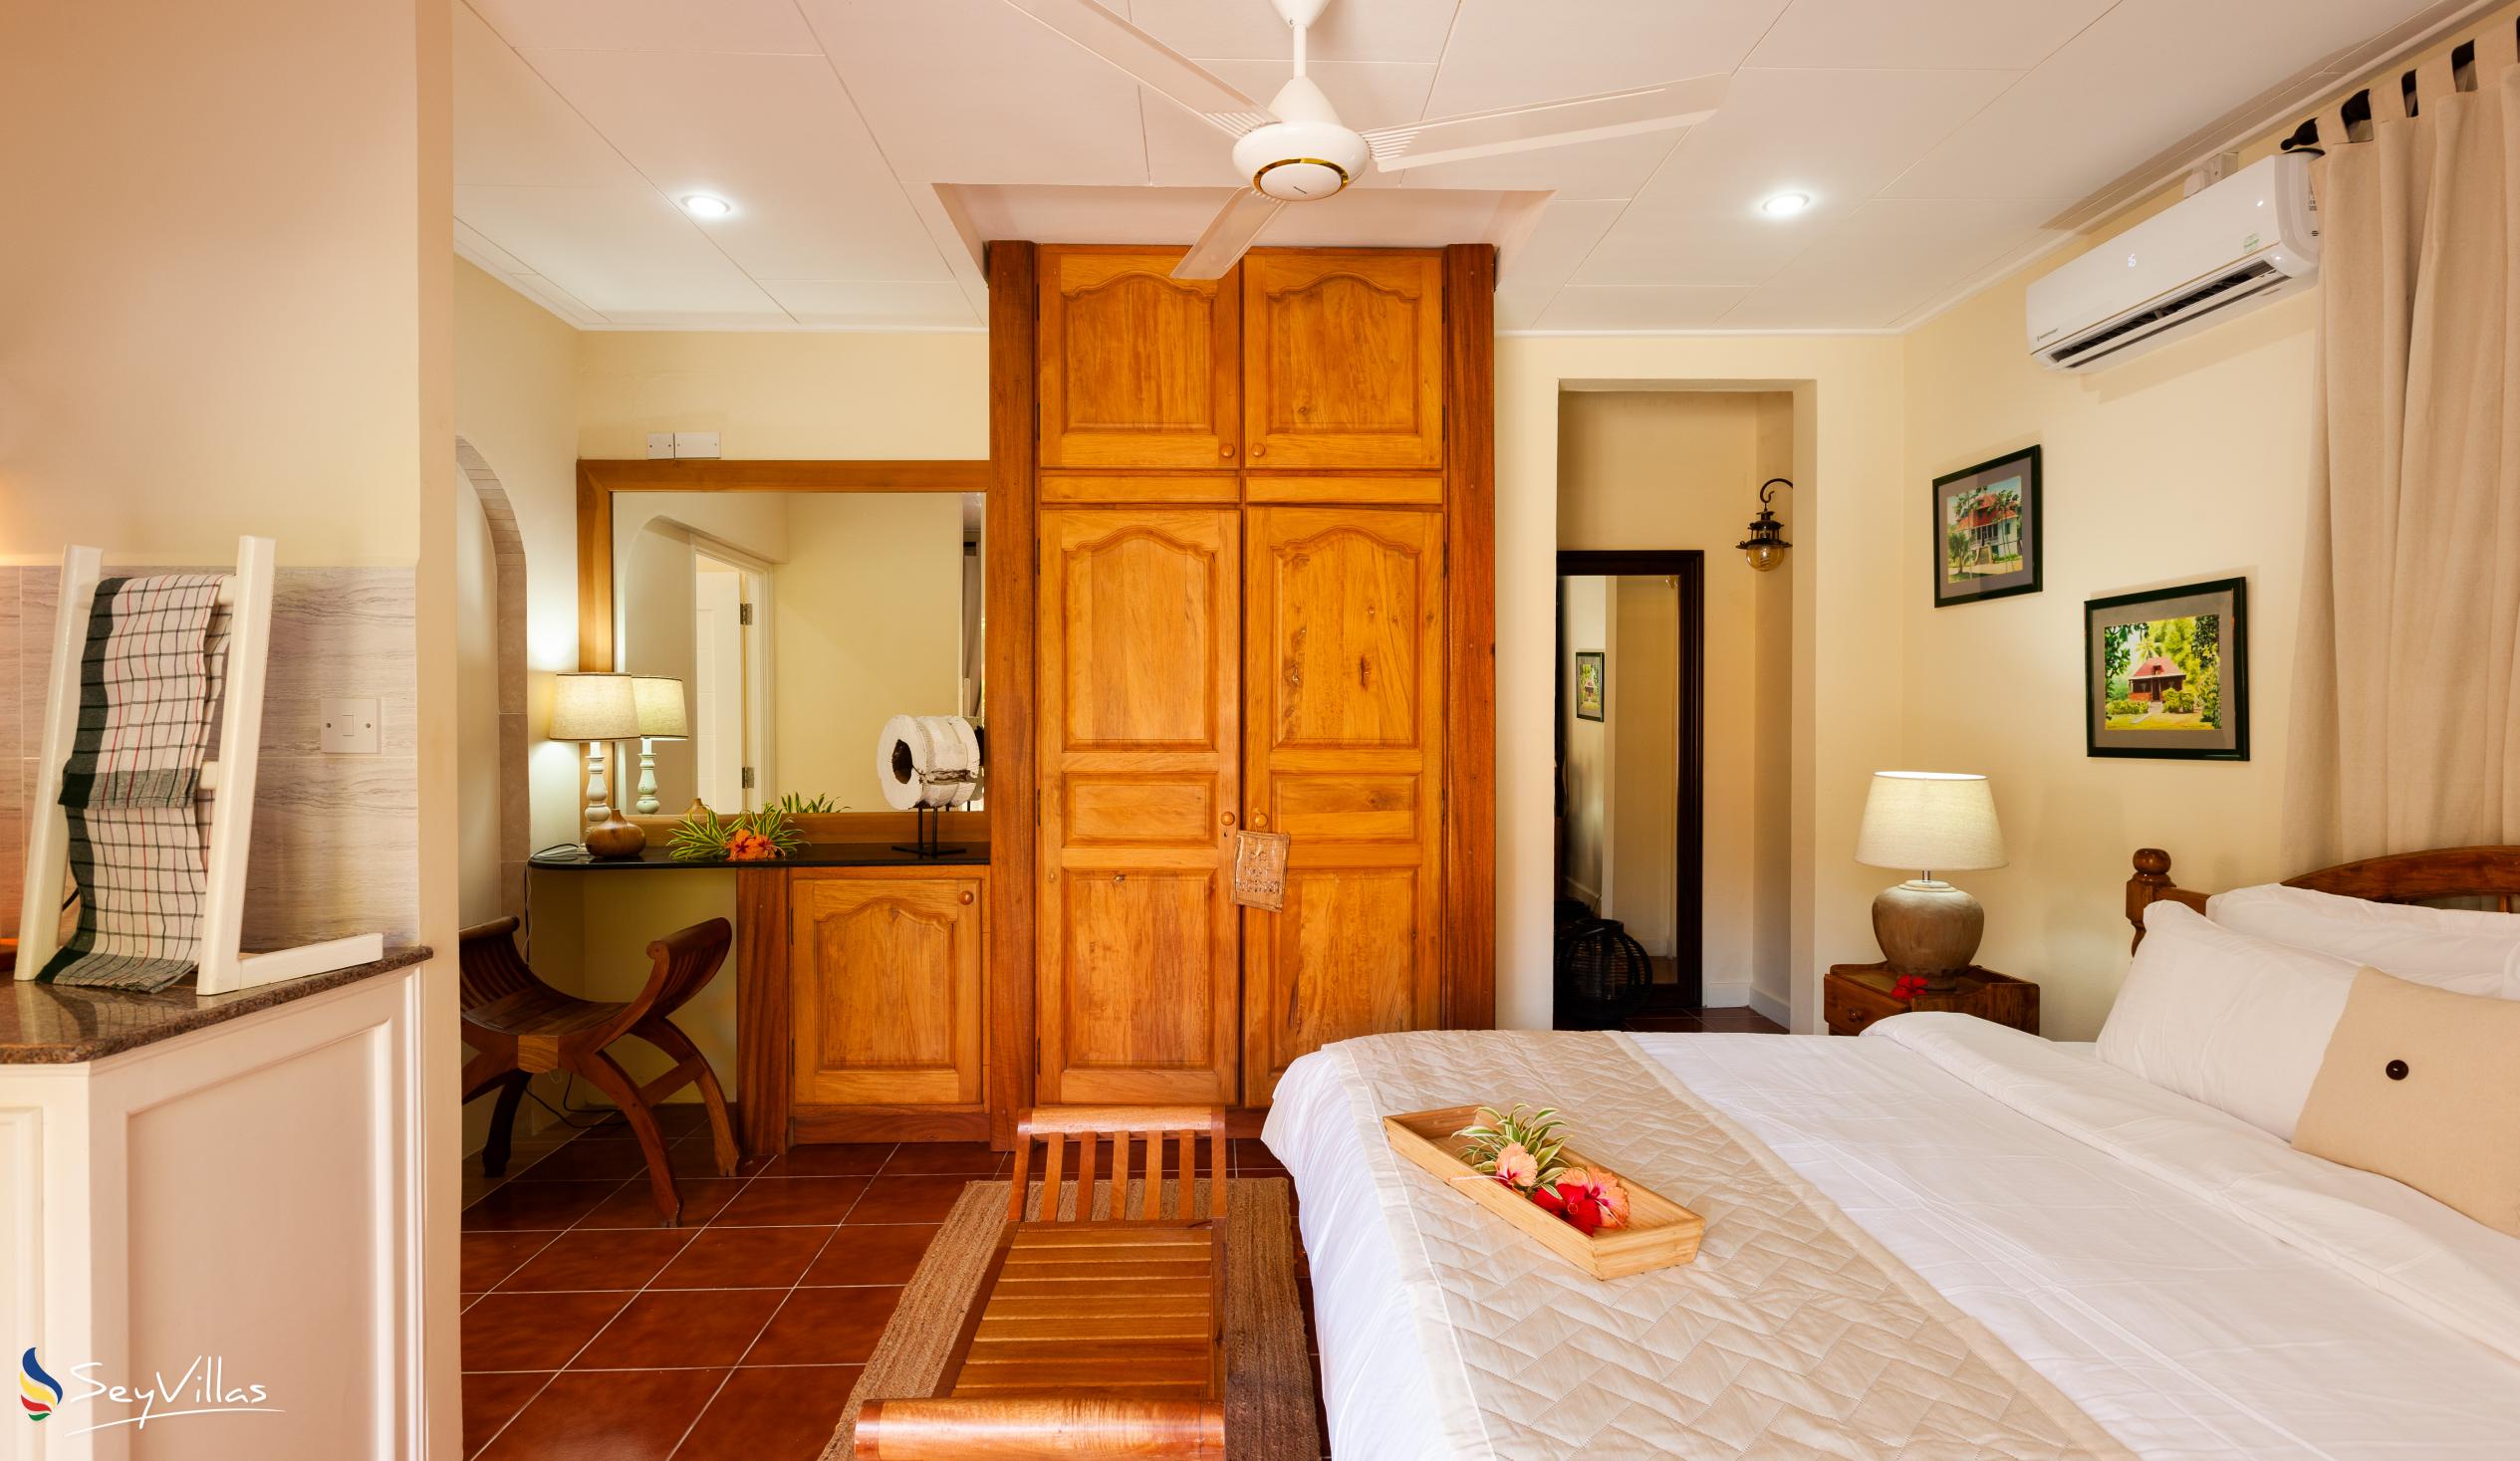 Photo 21: Oceane Self Catering - Classic Double Room - La Digue (Seychelles)